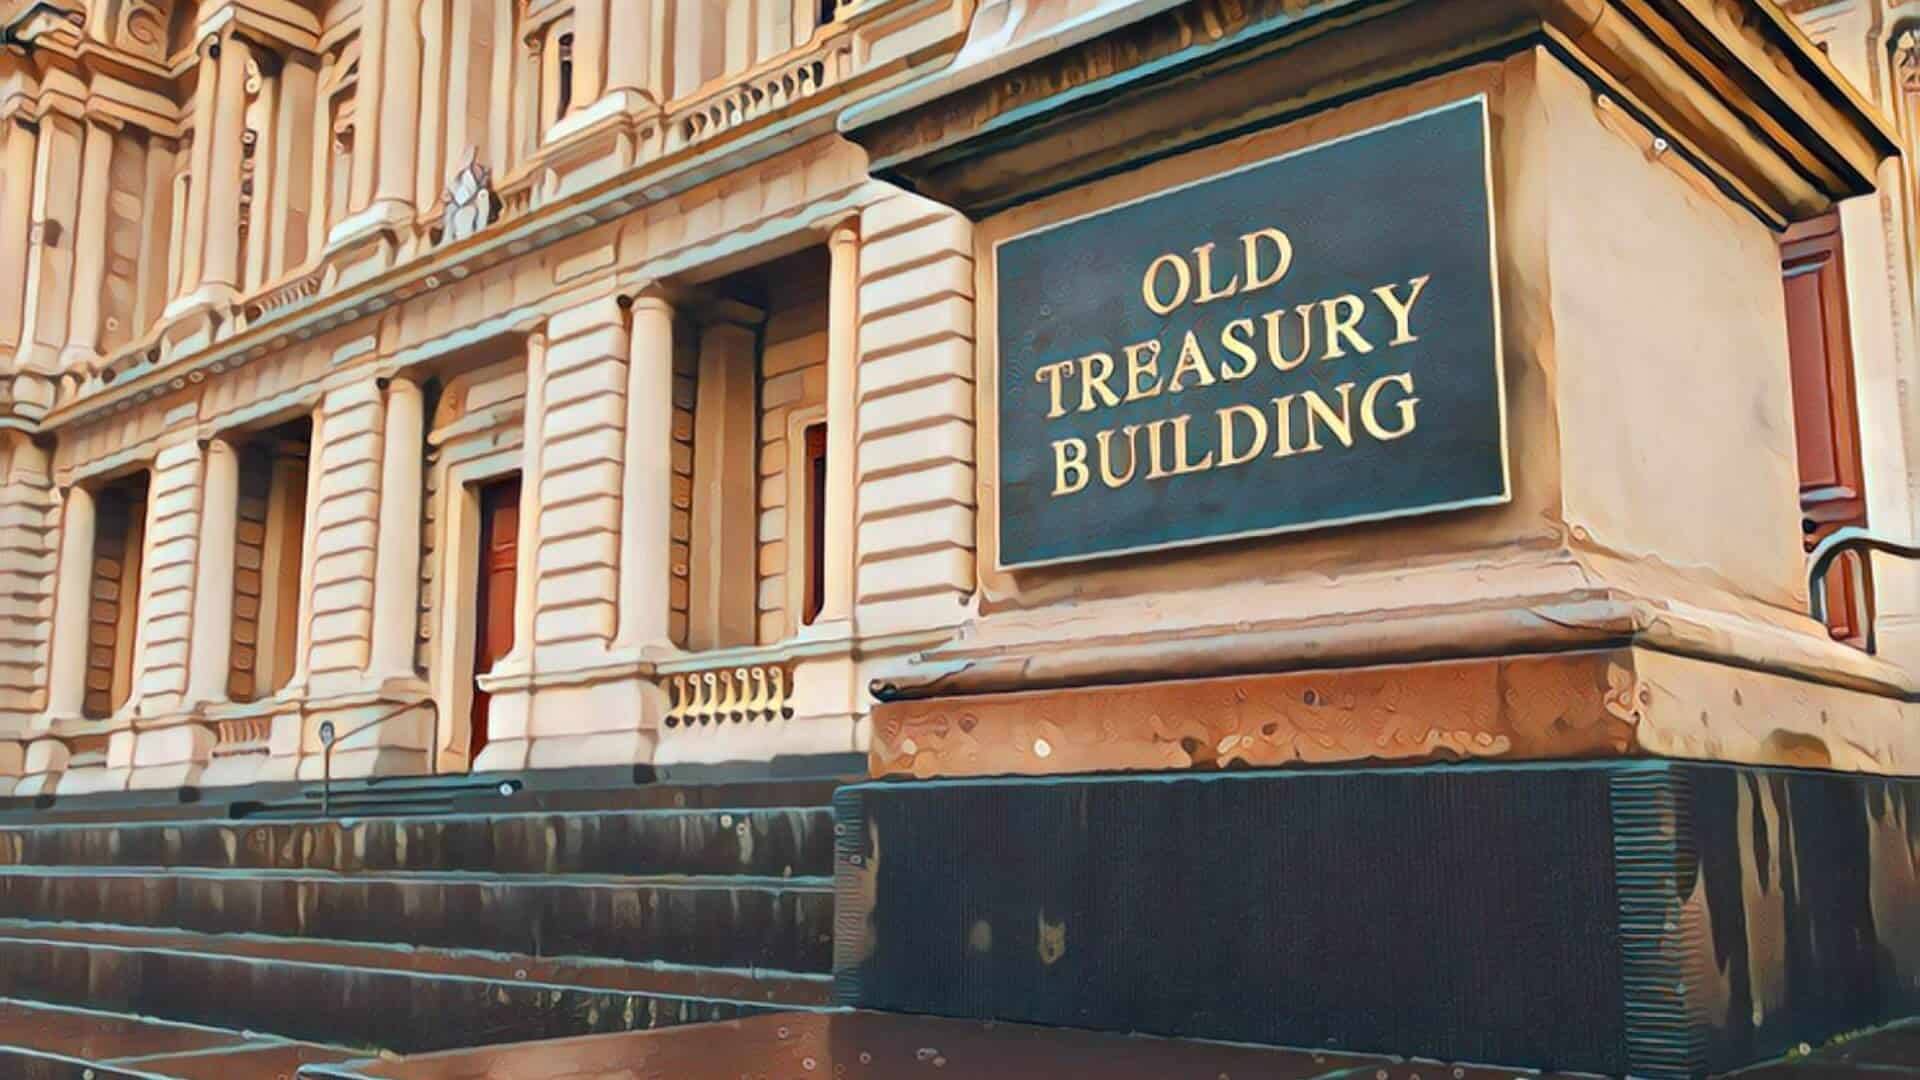 Commercial Real Estate Investing Opportunity Zones (How To Utilize Special Tax Benefit Funding) - the United States old treasury building